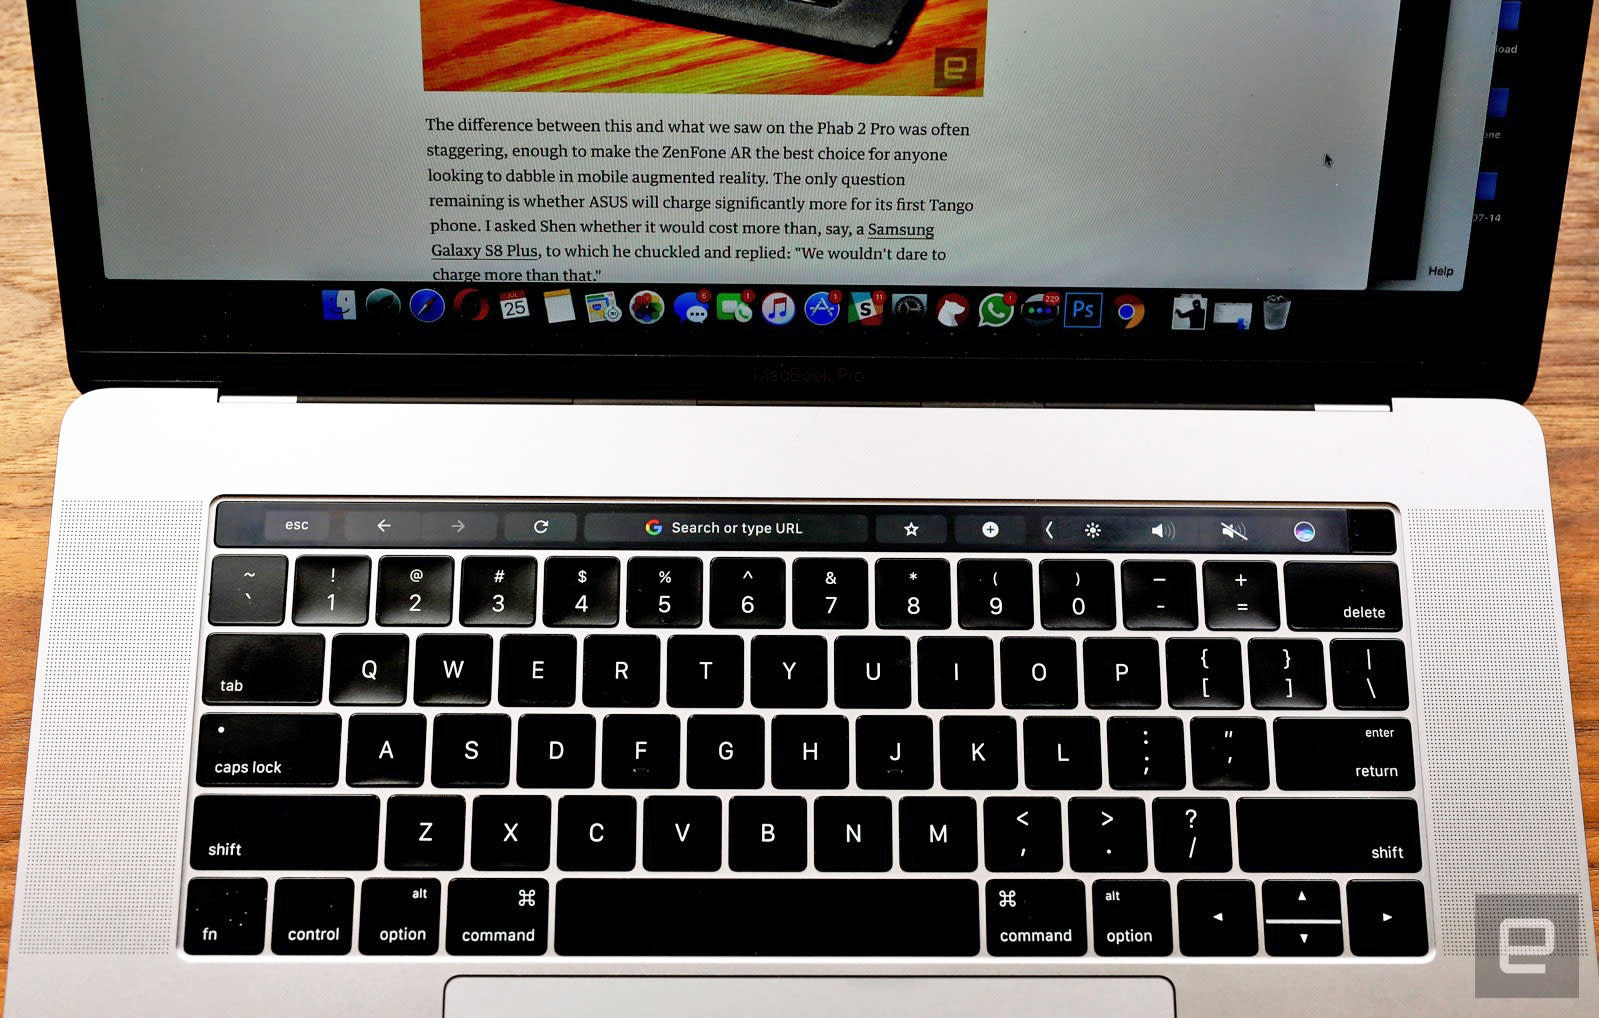 download chrome for macbook pro